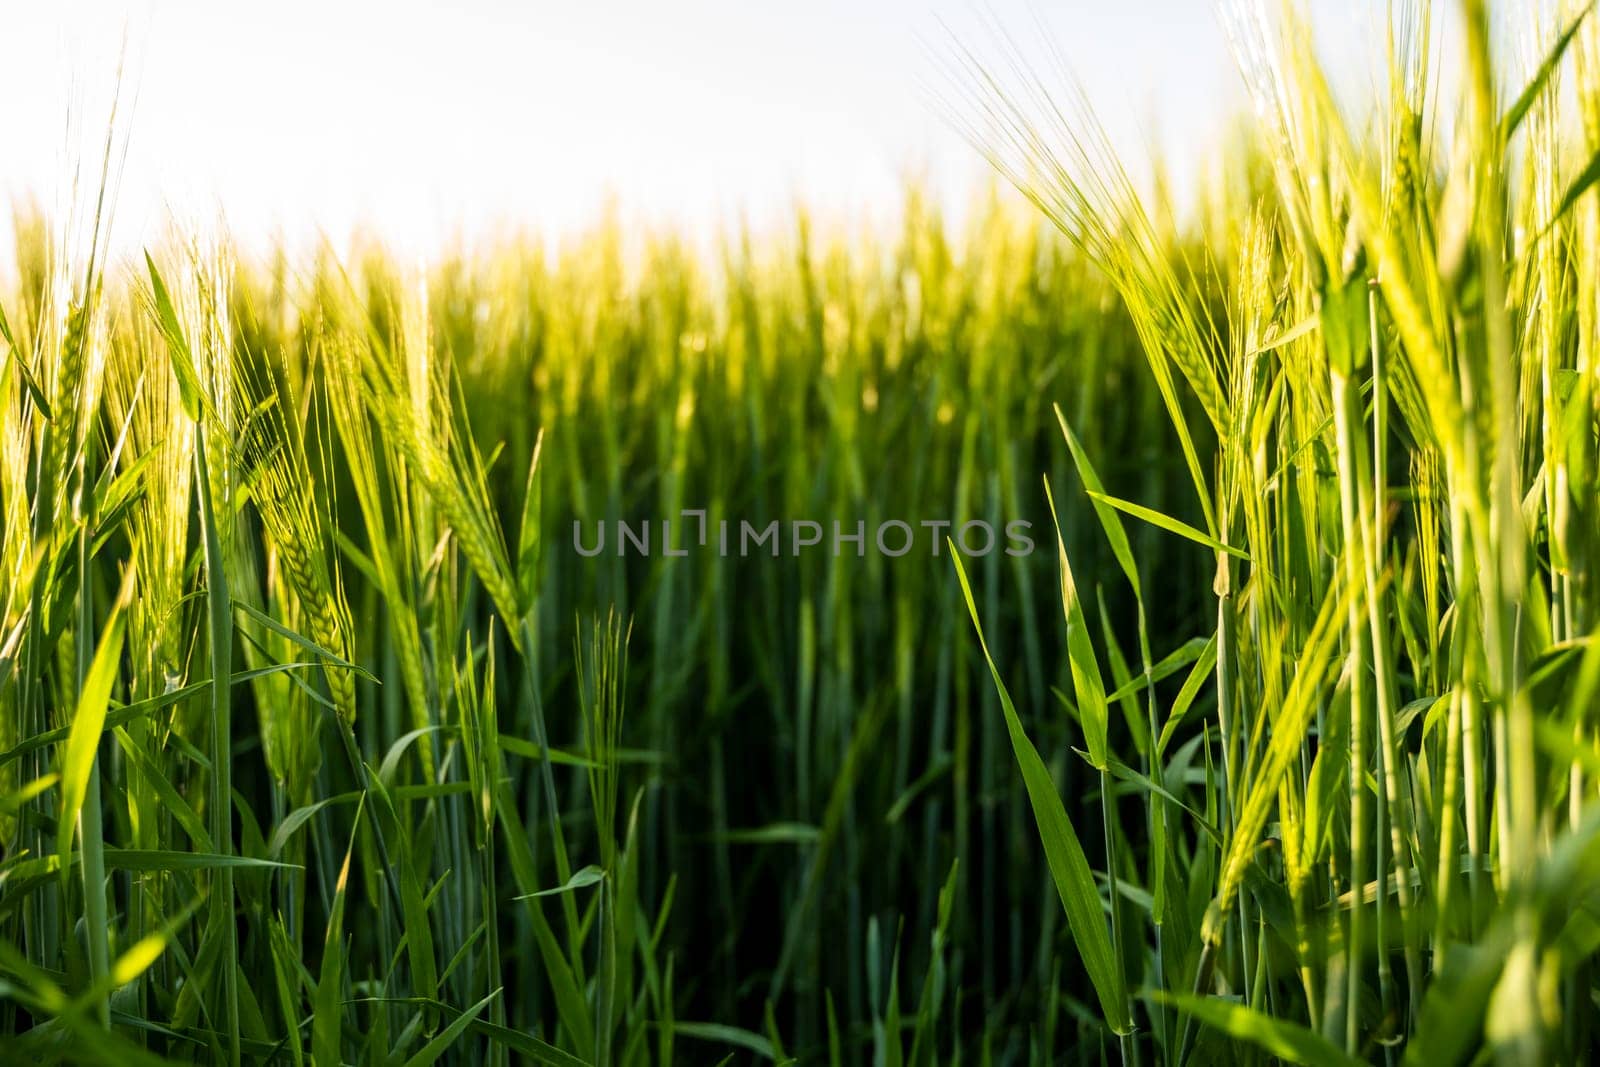 Green young and still immature barley grows, close-up. Agricultural crop of barley. Agriculture for obtaining grain crops